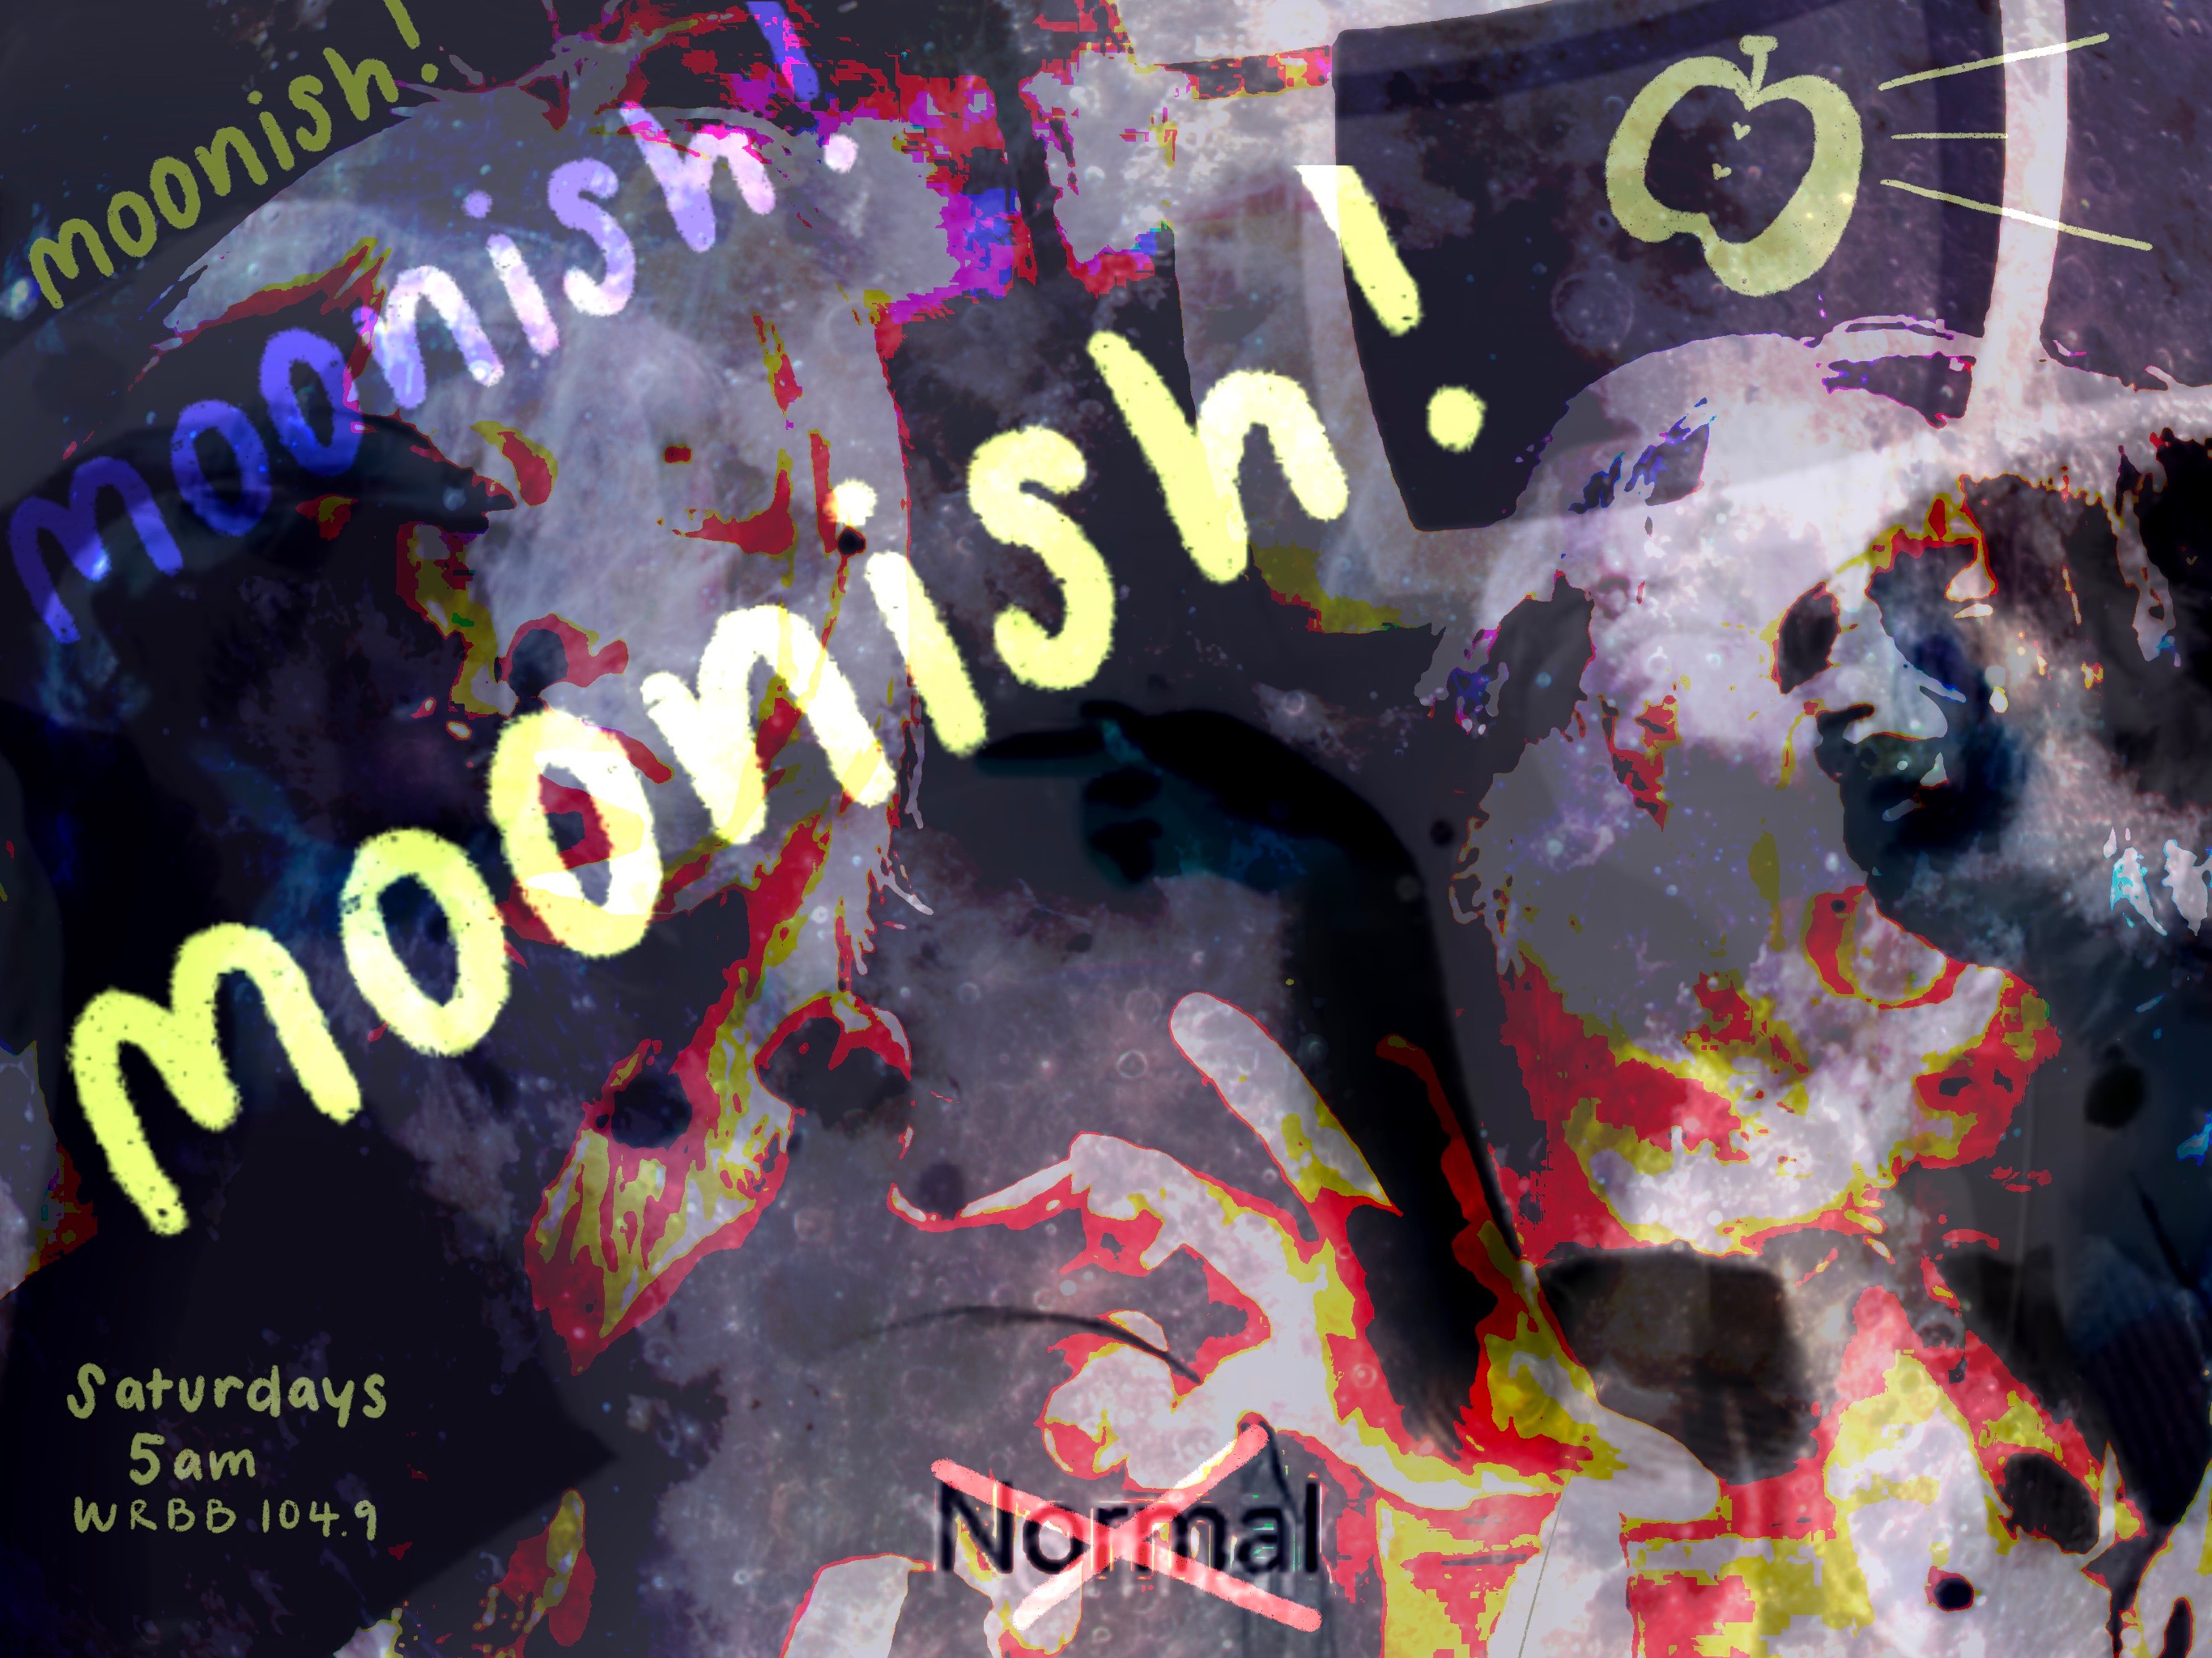 Moonish cover